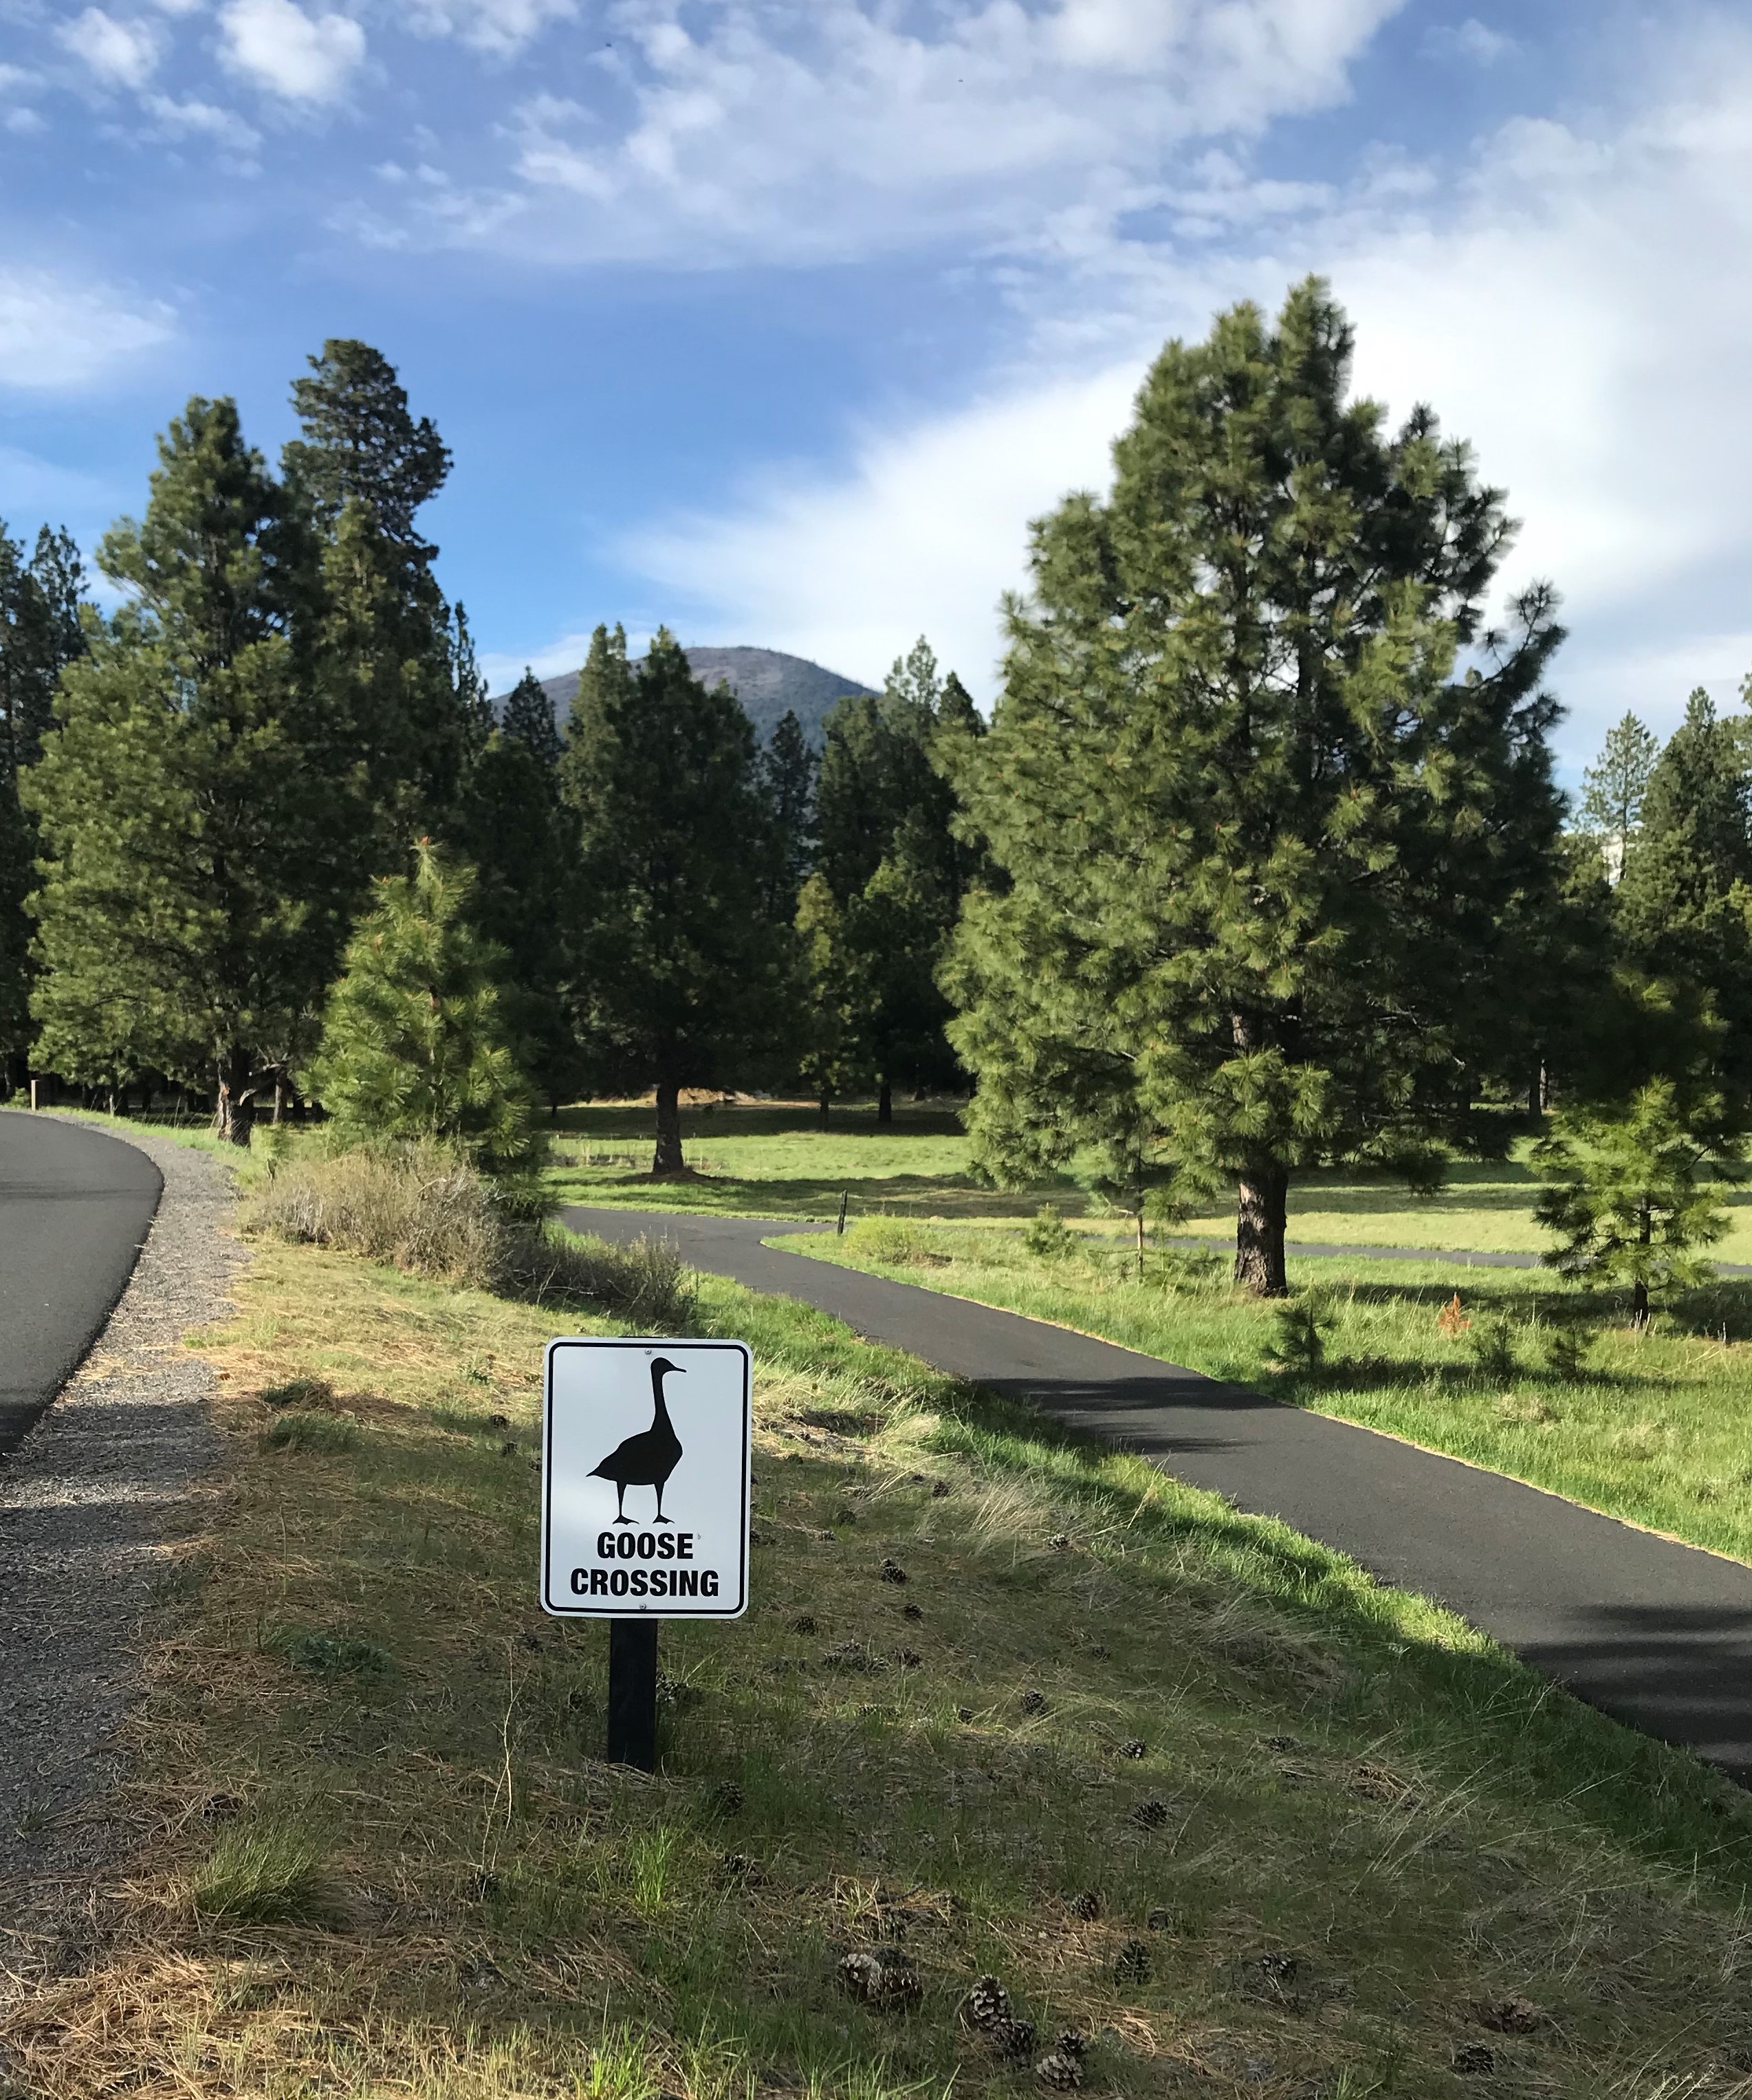 Goose Crossing Sign with Black Butte in Distance, Image Credit: Bucky Fuchs